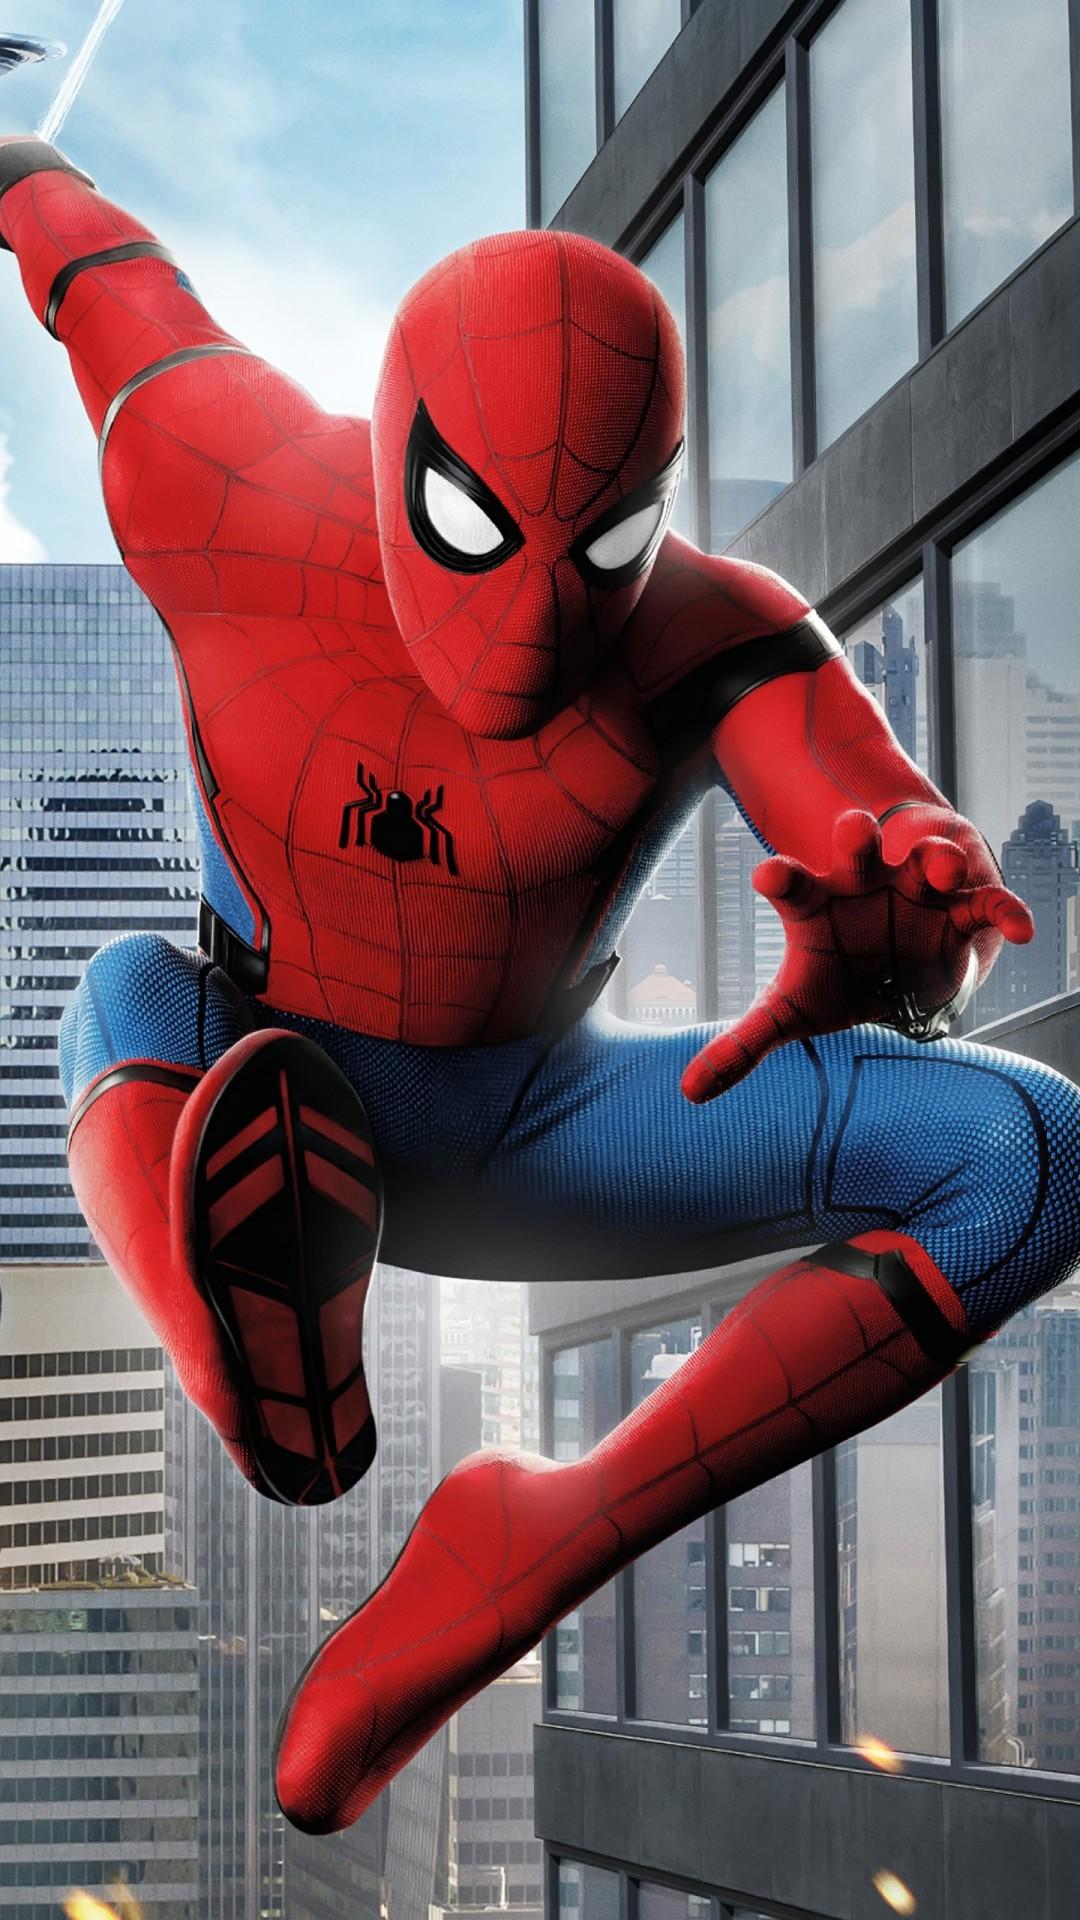 Spiderman Hd Wallpaper For Android - Spider Man Homecoming Hd - 1080x1920  Wallpaper 